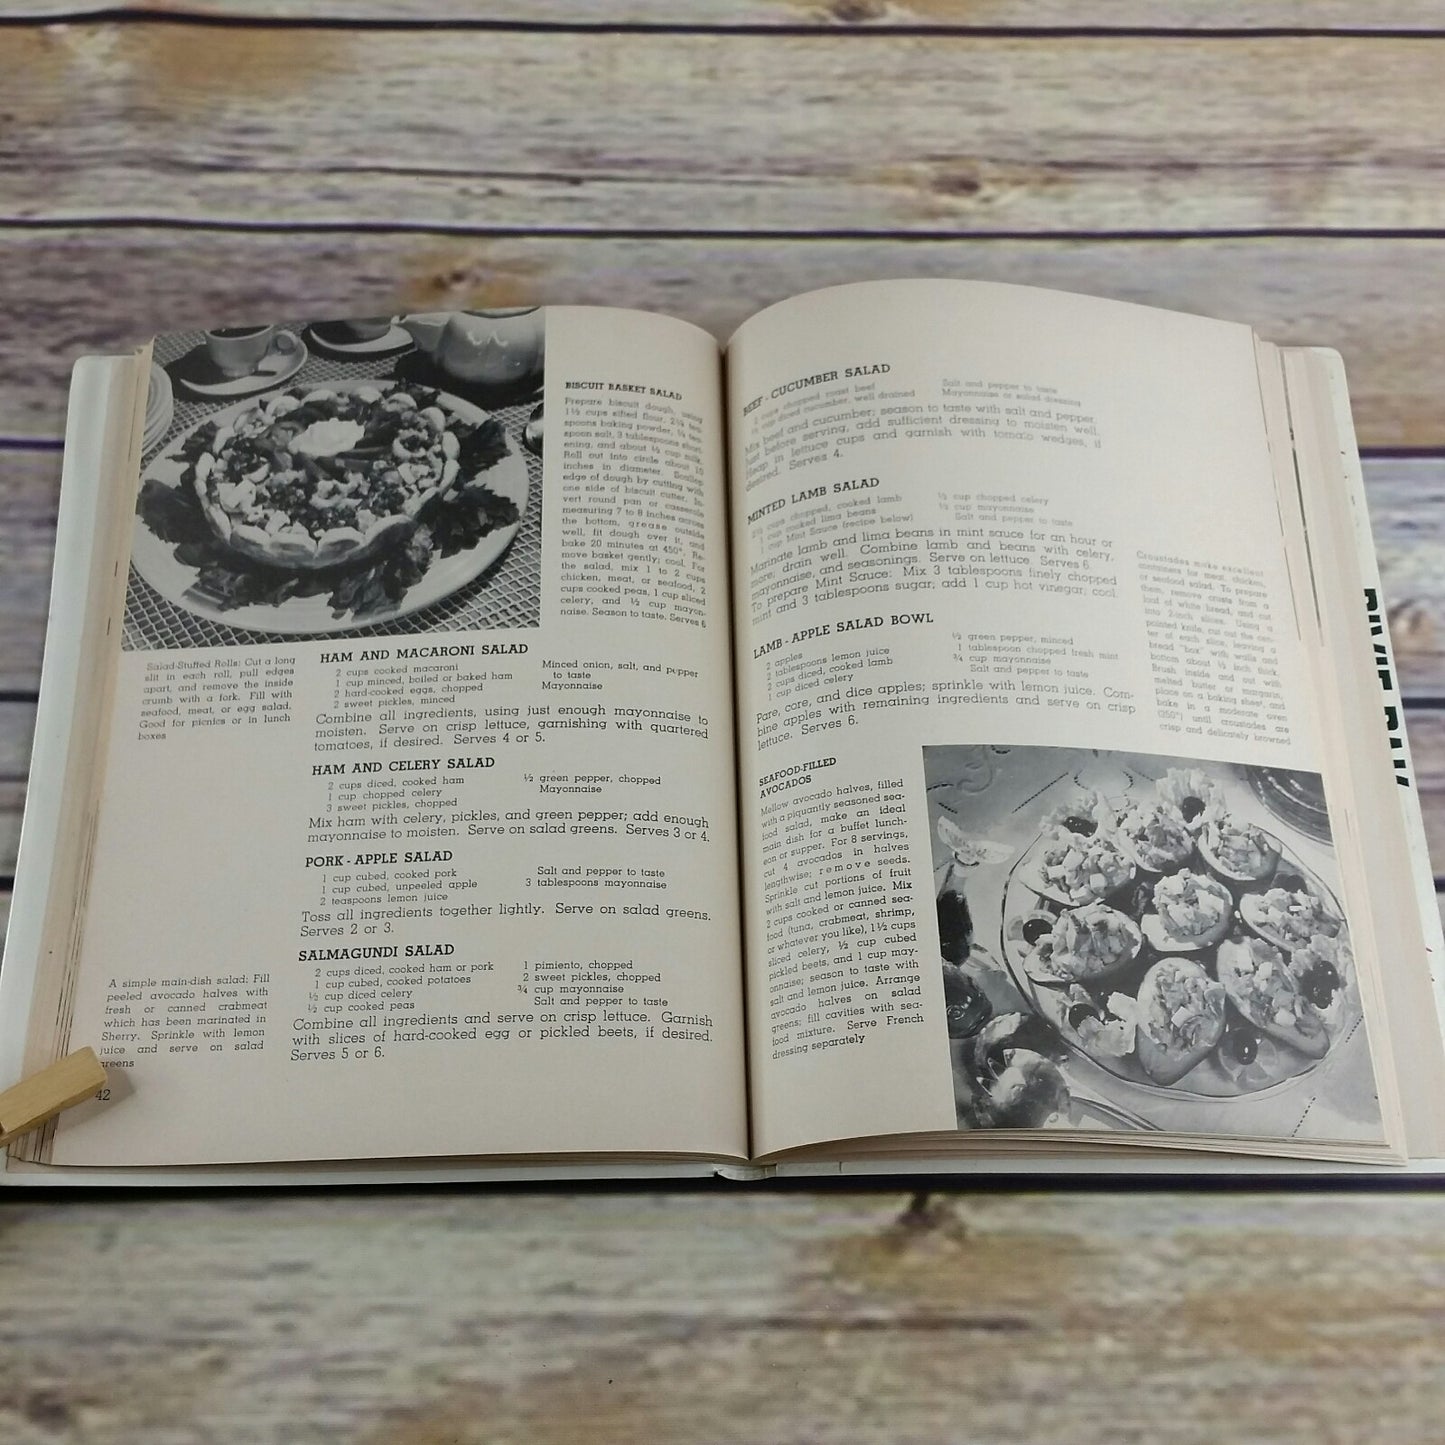 Vintage Cookbook Sunset Salad Book Recipes 1957 Eighth Printing Washable Cover Salads Hors D'oeuvres and Canapes - At Grandma's Table